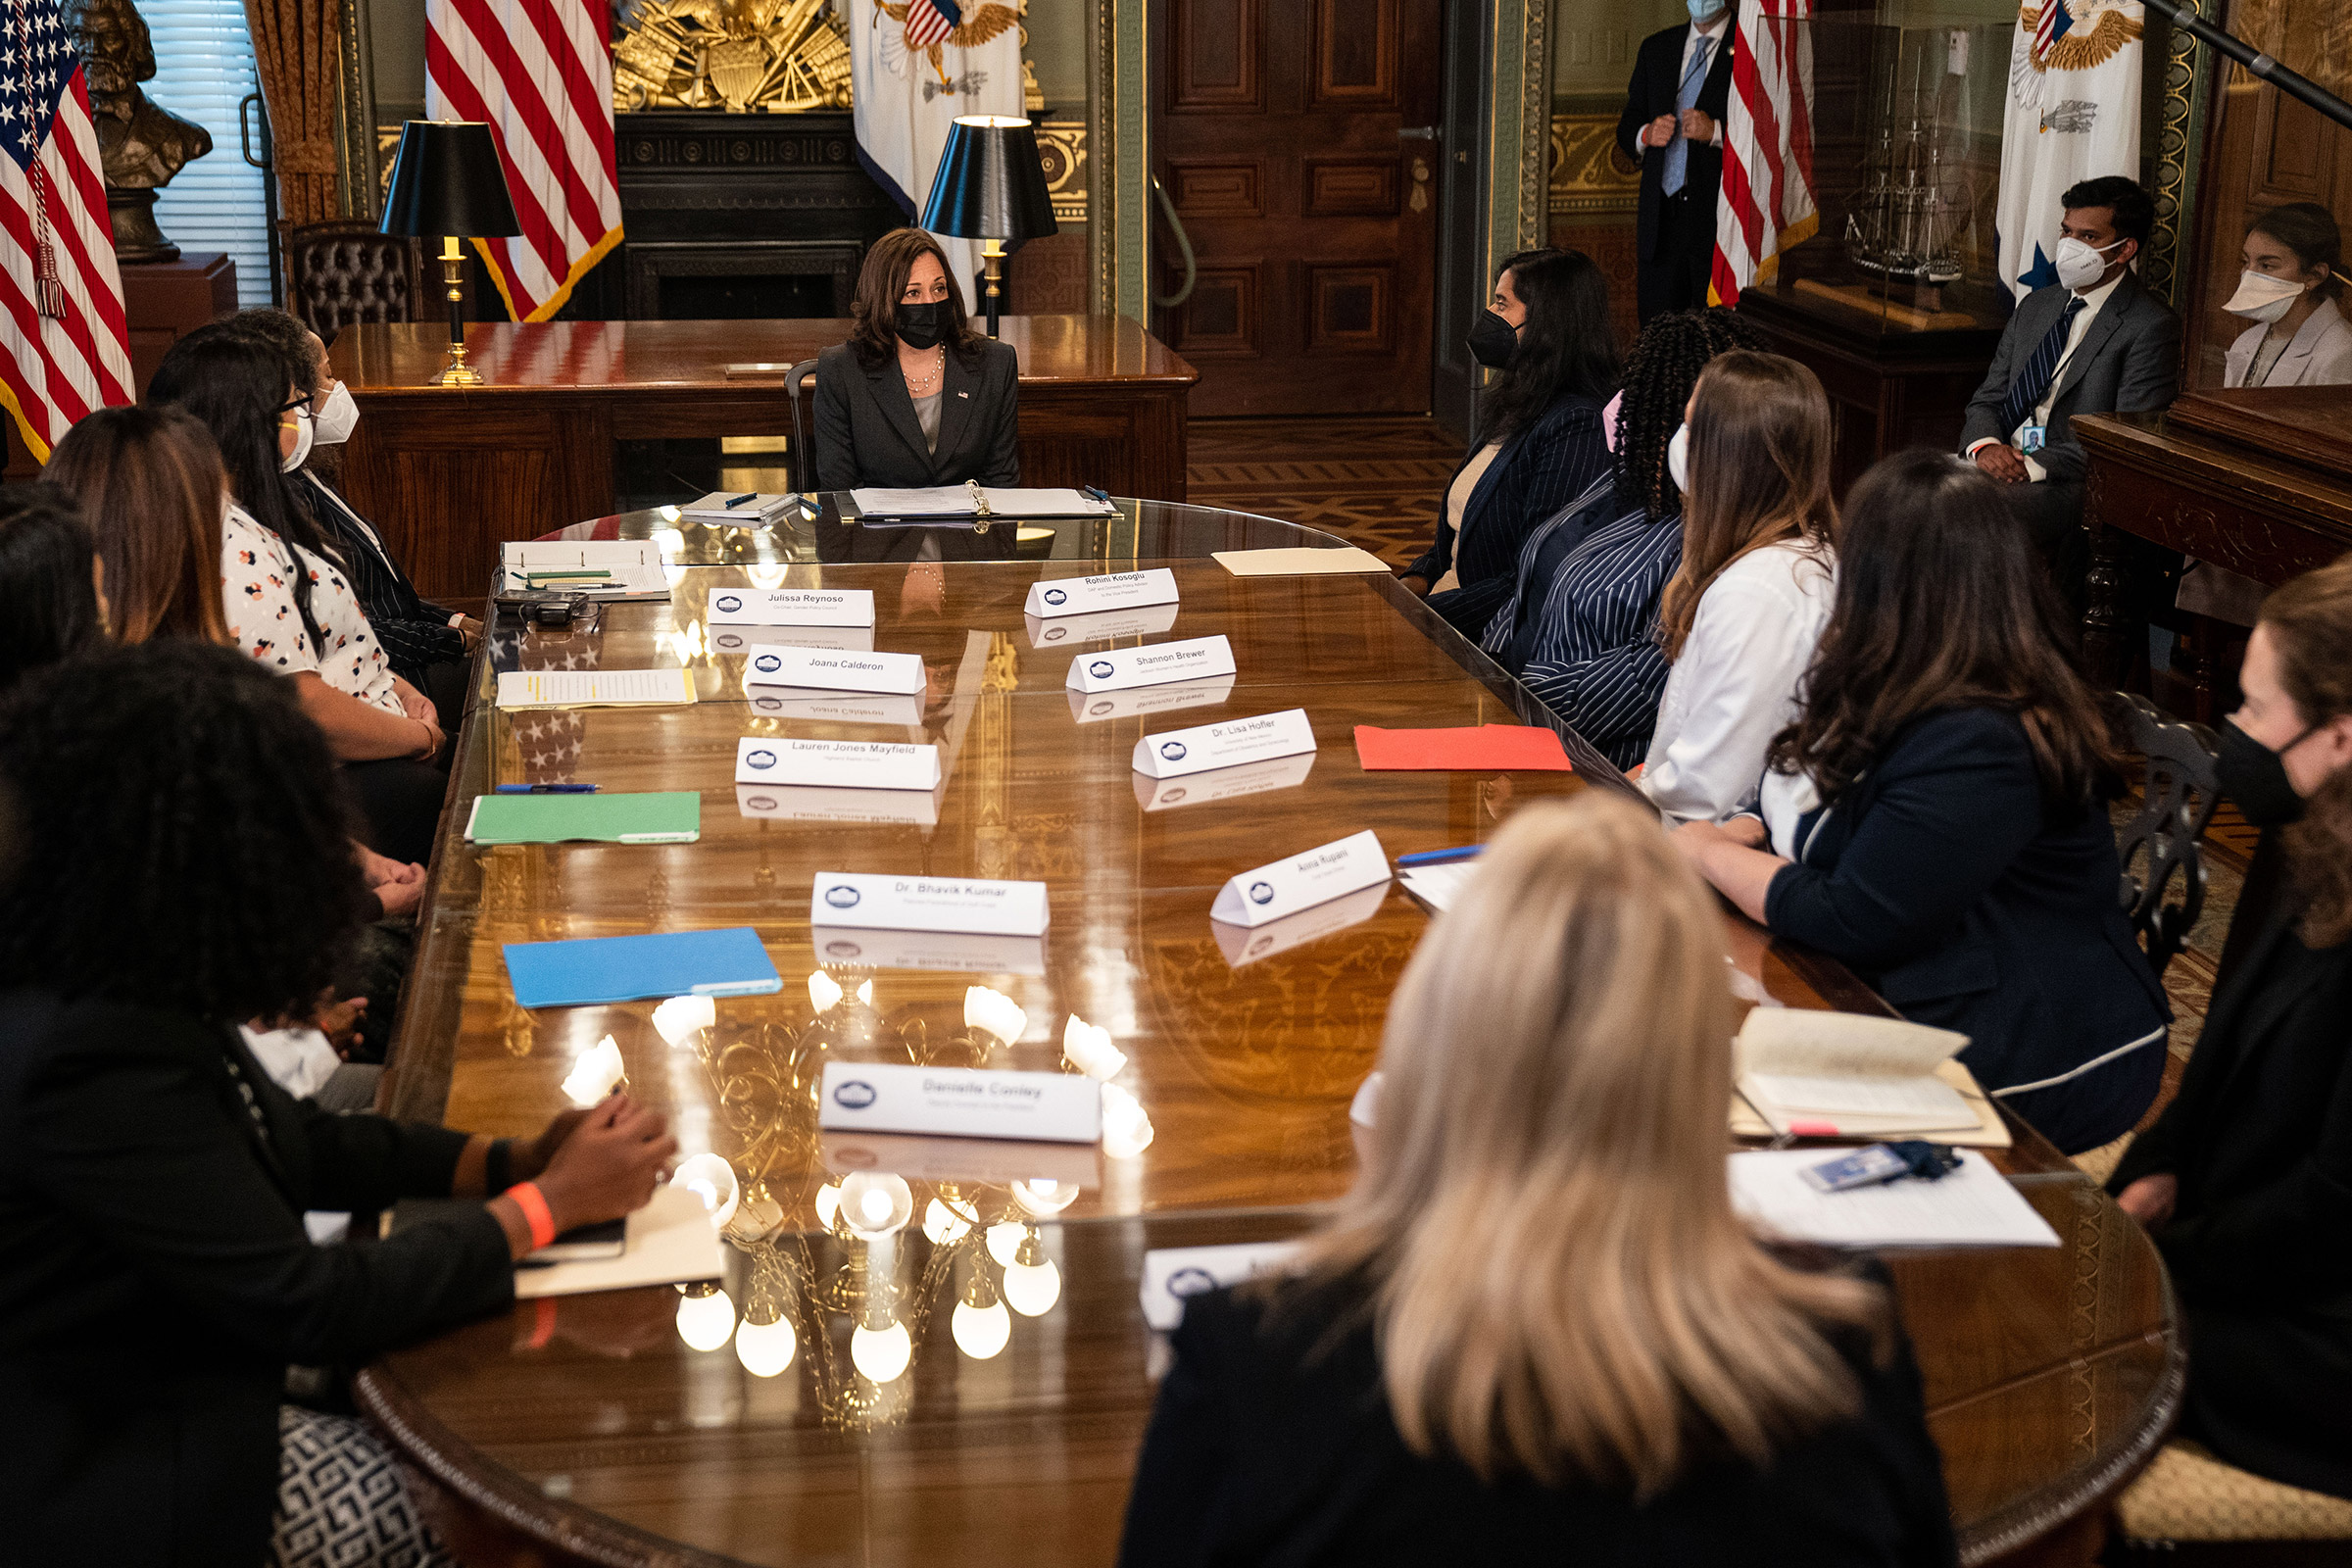 Vice President Kamala Harris meets with abortion and reproductive health providers and patients to discuss the impact of Texas Senate Bill 8 and other restrictions on reproductive care at the White House in Washington, D.C., on Sept. 9, 2021. (Kent Nishimura—Los Angeles Times/Getty Images)